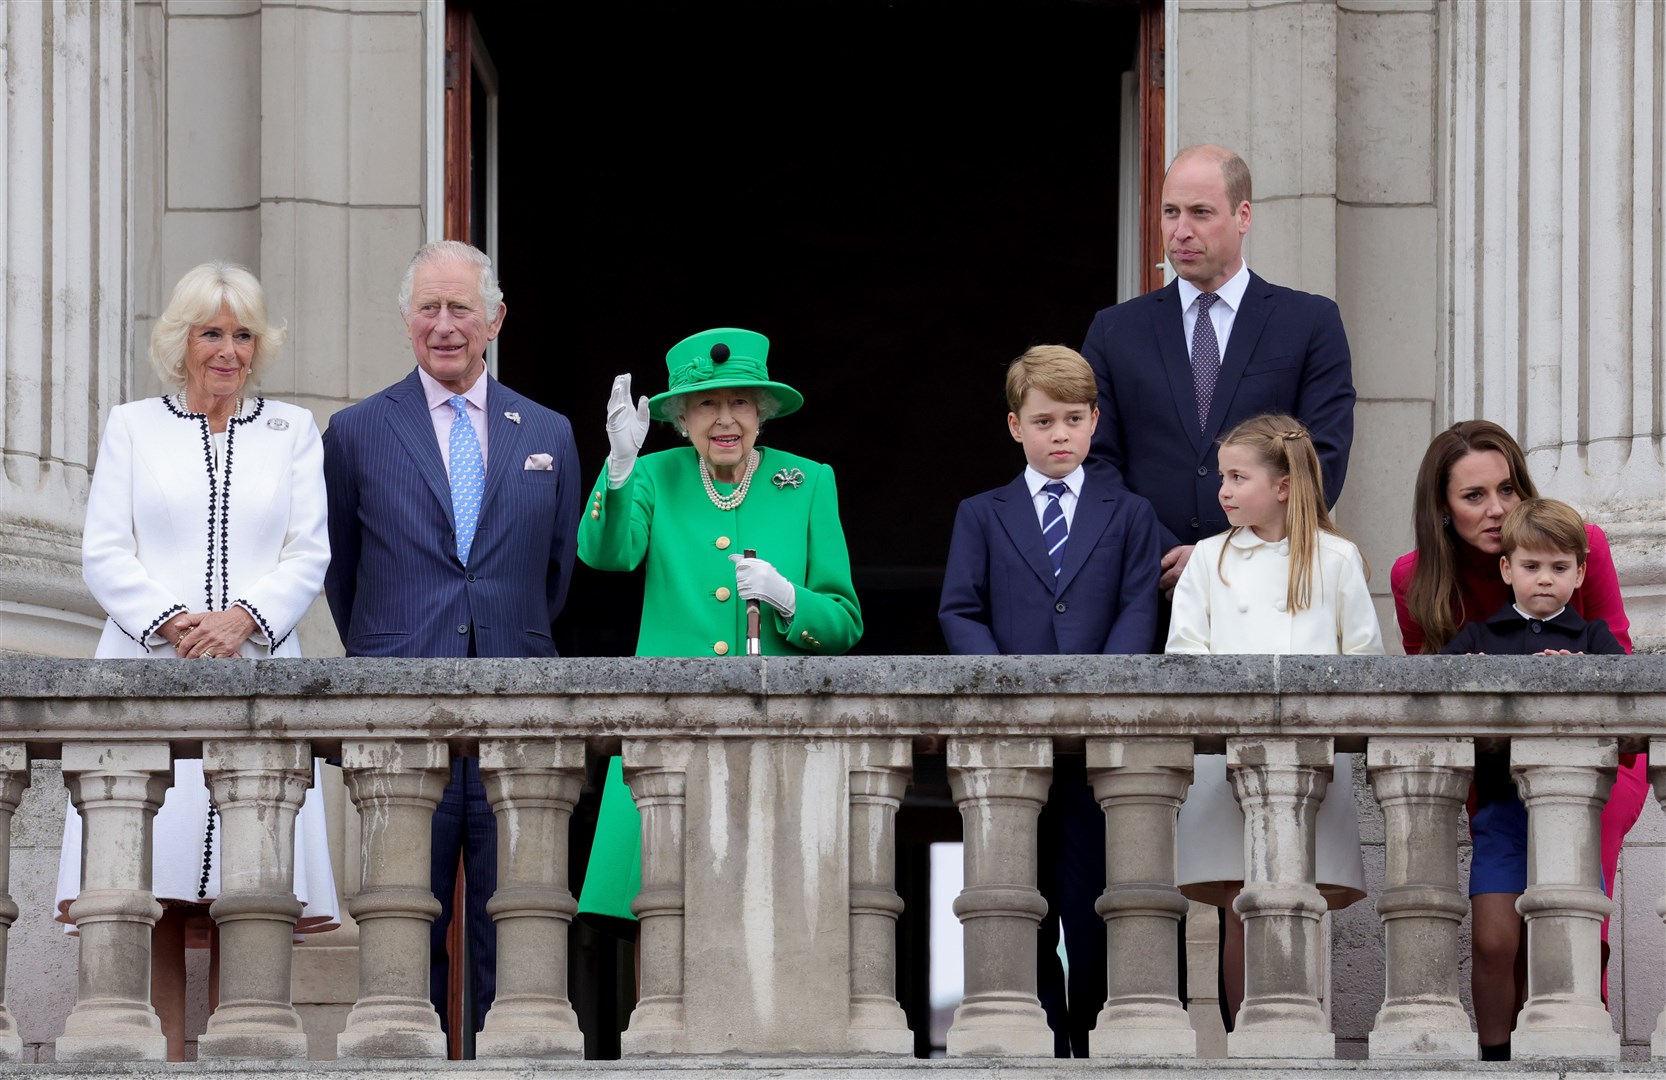 Four days of celebrations marked the Queen’s Platinum Jubilee. Here, she joins the Duchess of Cornwall, the Prince of Wales, Prince George, the Duke of Cambridge, Princess Charlotte, Prince Louis, and the Duchess of Cambridge on the balcony of Buckingham Palace (Chris Jackson/PA)